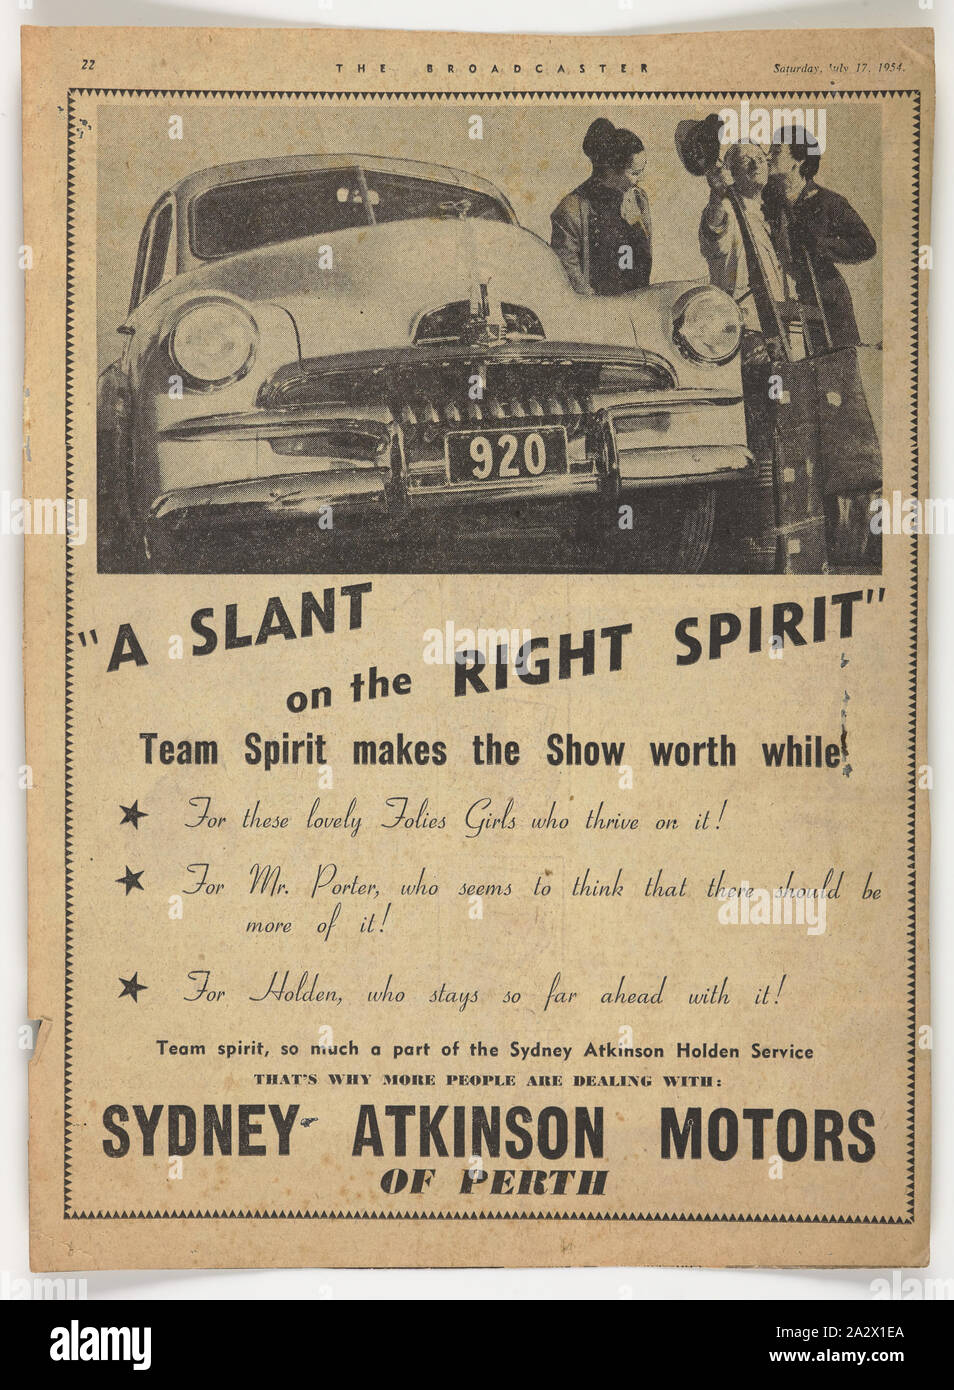 Newspaper Advertisement - Holden Cars at Sydney-Atkinson Motors, Perth, The Broadcaster, 17 Jul 1954, Clipping of an advertisement for Holden cars at Sydney-Atkinson Motors, Perth, published in The Broadcaster, 17 July 1954. One of the models is Bernice Kopple (kissing the porter) who had migrated from Scotland to Australia, in December 1950 onboard the ship New Australia'. Bernice Kopple was born in Glasgow, Scotland in 1930 and migrated to Melbourne onboard the ship New Australia in 1950 Stock Photo